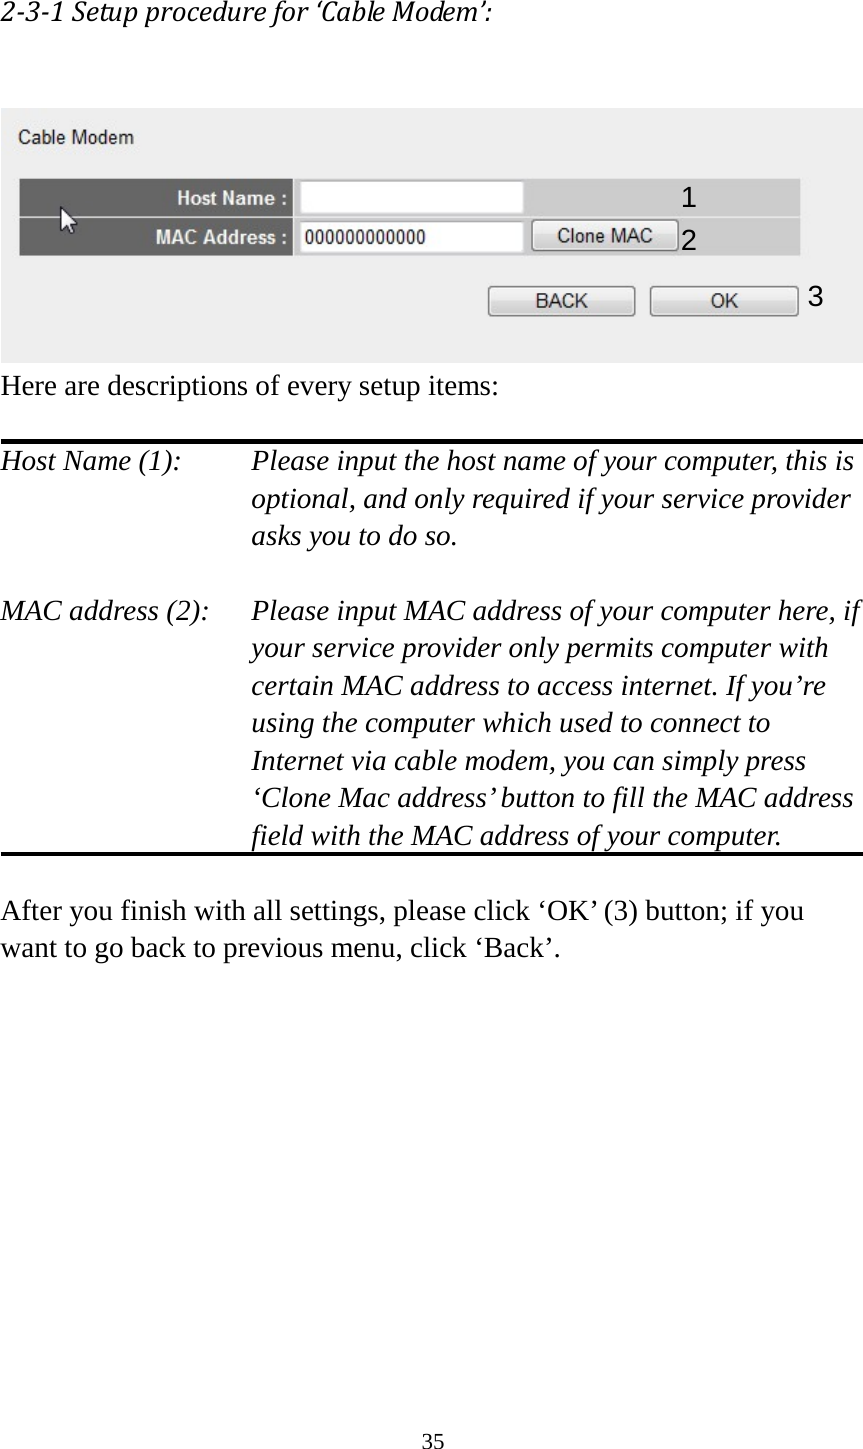 35 2-3-1 Setup procedure for ‘Cable Modem’:   Here are descriptions of every setup items:  Host Name (1):     Please input the host name of your computer, this is     optional, and only required if your service provider             asks you to do so.    MAC address (2):    Please input MAC address of your computer here, if your service provider only permits computer with certain MAC address to access internet. If you’re using the computer which used to connect to Internet via cable modem, you can simply press ‘Clone Mac address’ button to fill the MAC address field with the MAC address of your computer.  After you finish with all settings, please click ‘OK’ (3) button; if you want to go back to previous menu, click ‘Back’.     1 2 3 